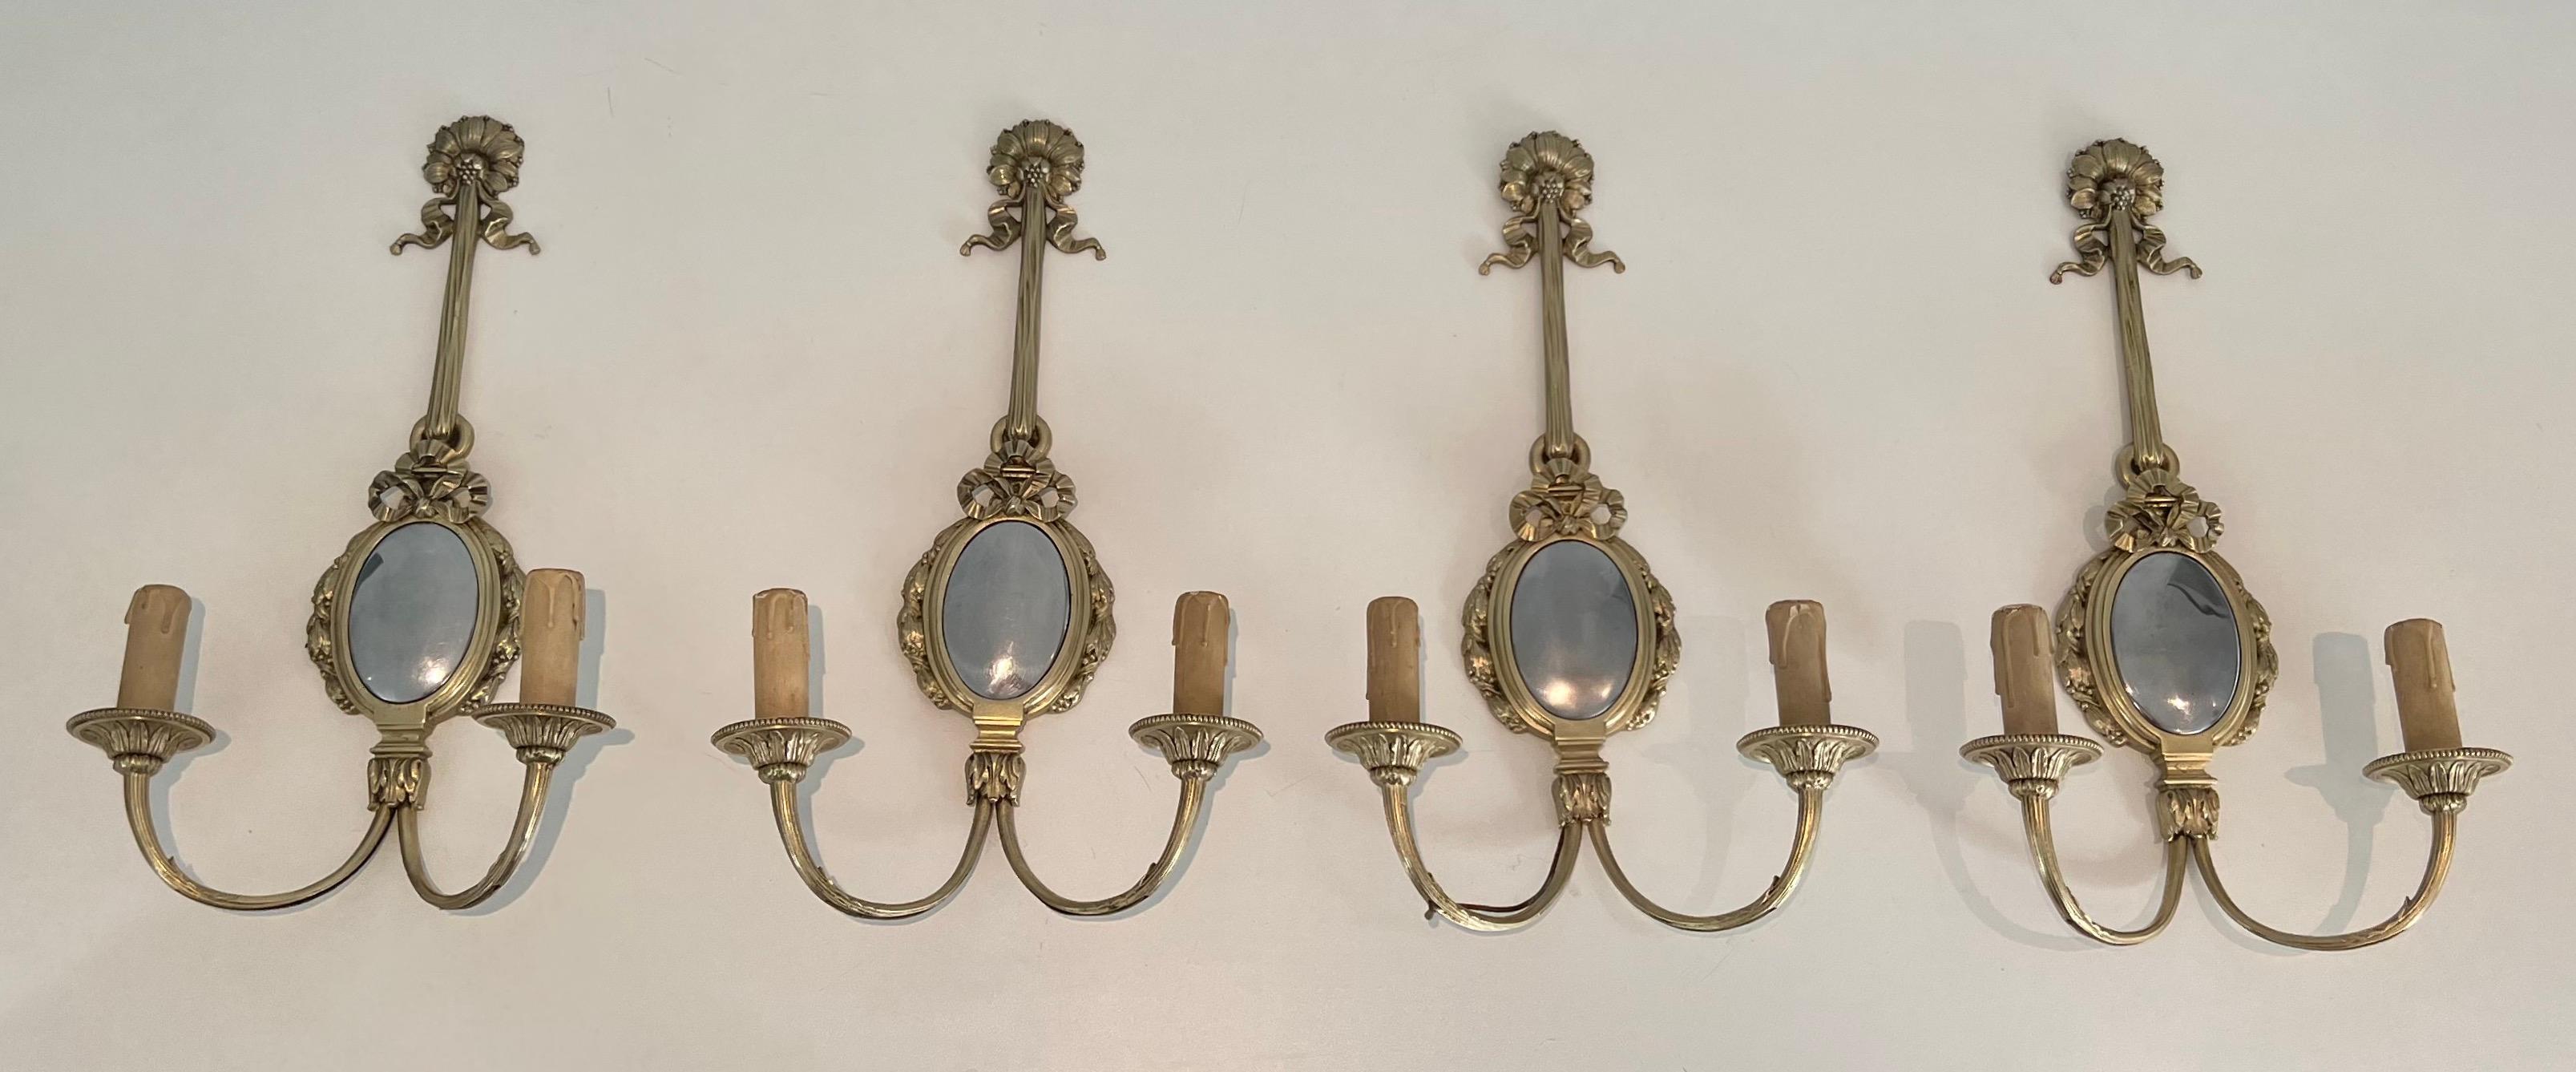 Set of 4 Bronze and Chrome Wall Sconces 14